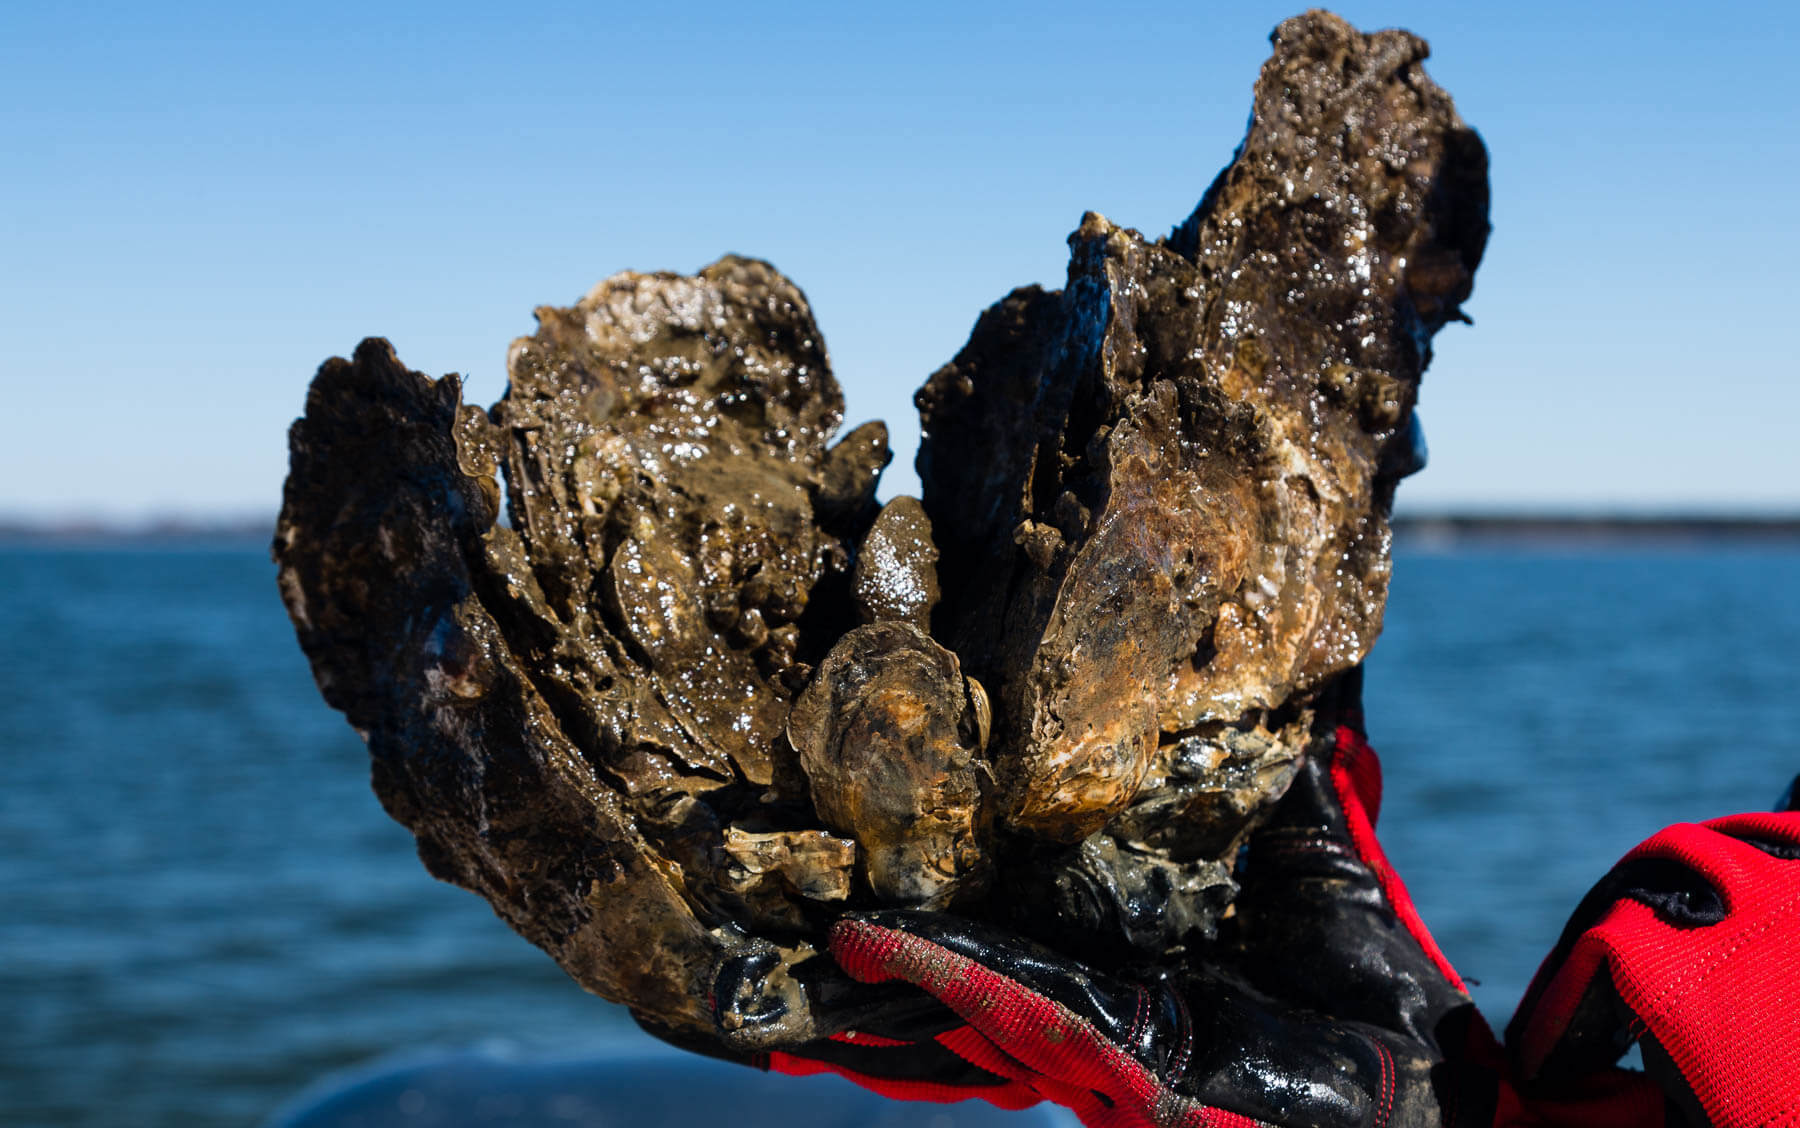 A hand holds an oyster clump that came from an aquatic oyster reef.